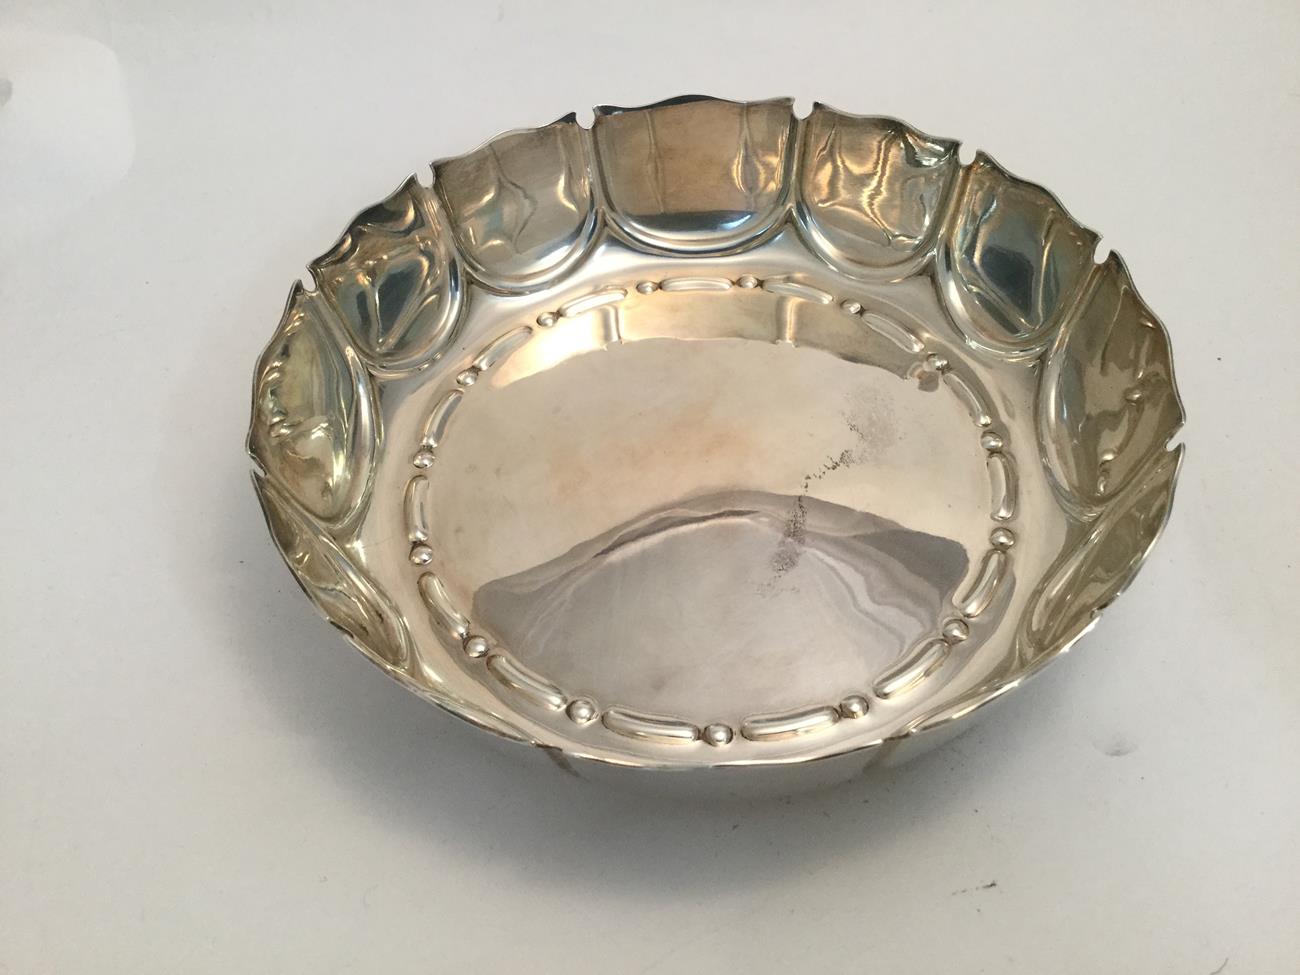 An Edward VII Silver Strawberry-Dish, by Theodore Rossi, London, 1907, circular and with lobed sides - Image 3 of 4